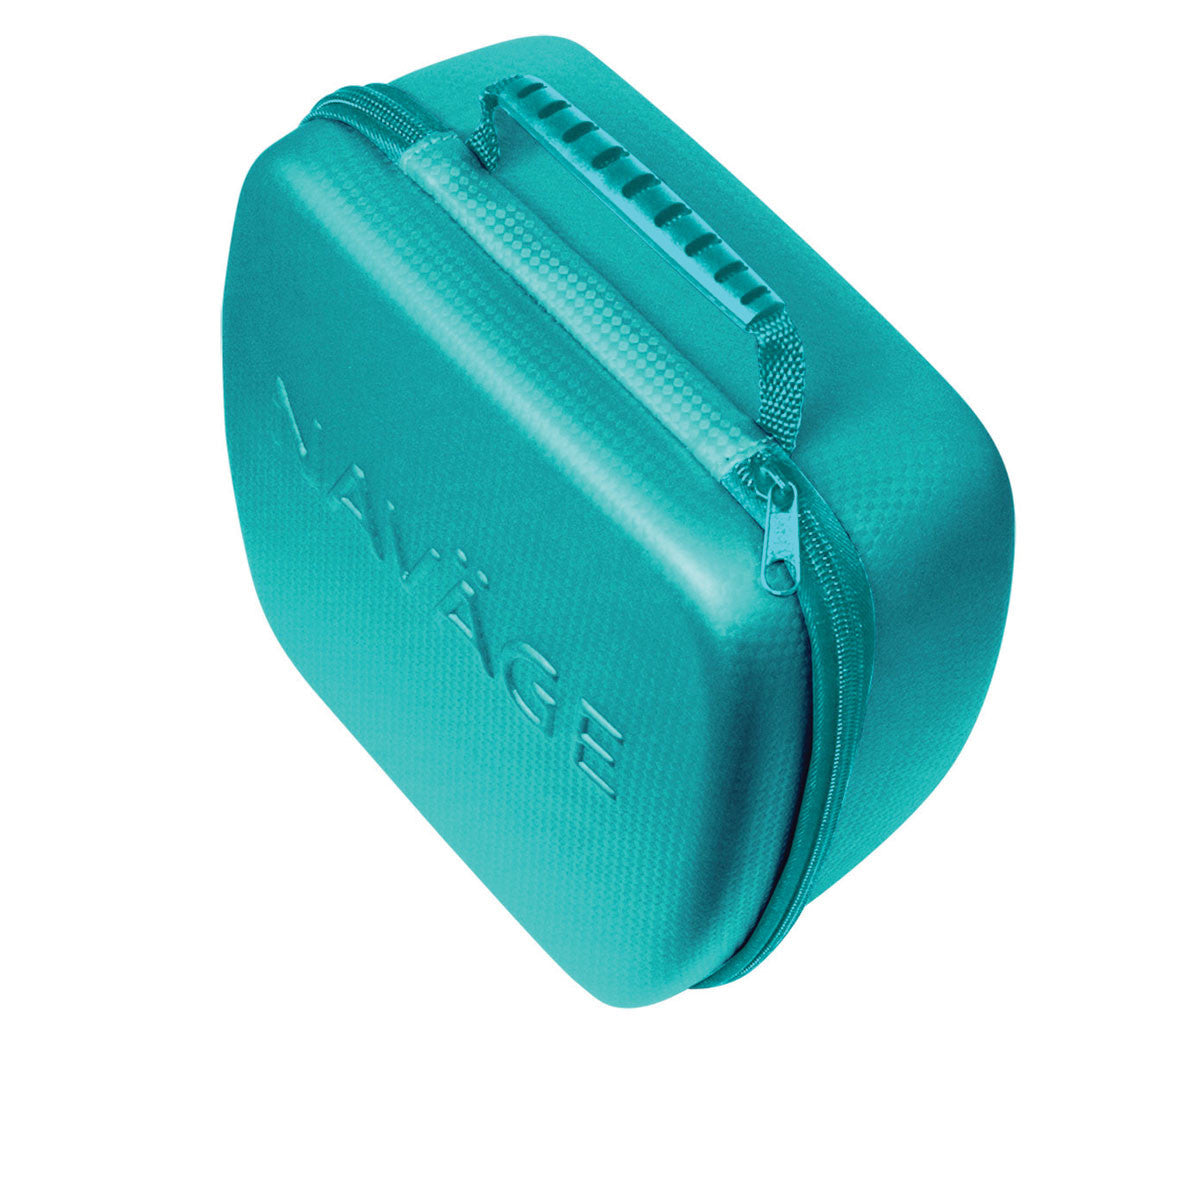 Navage Nose Cleaner Travel Case